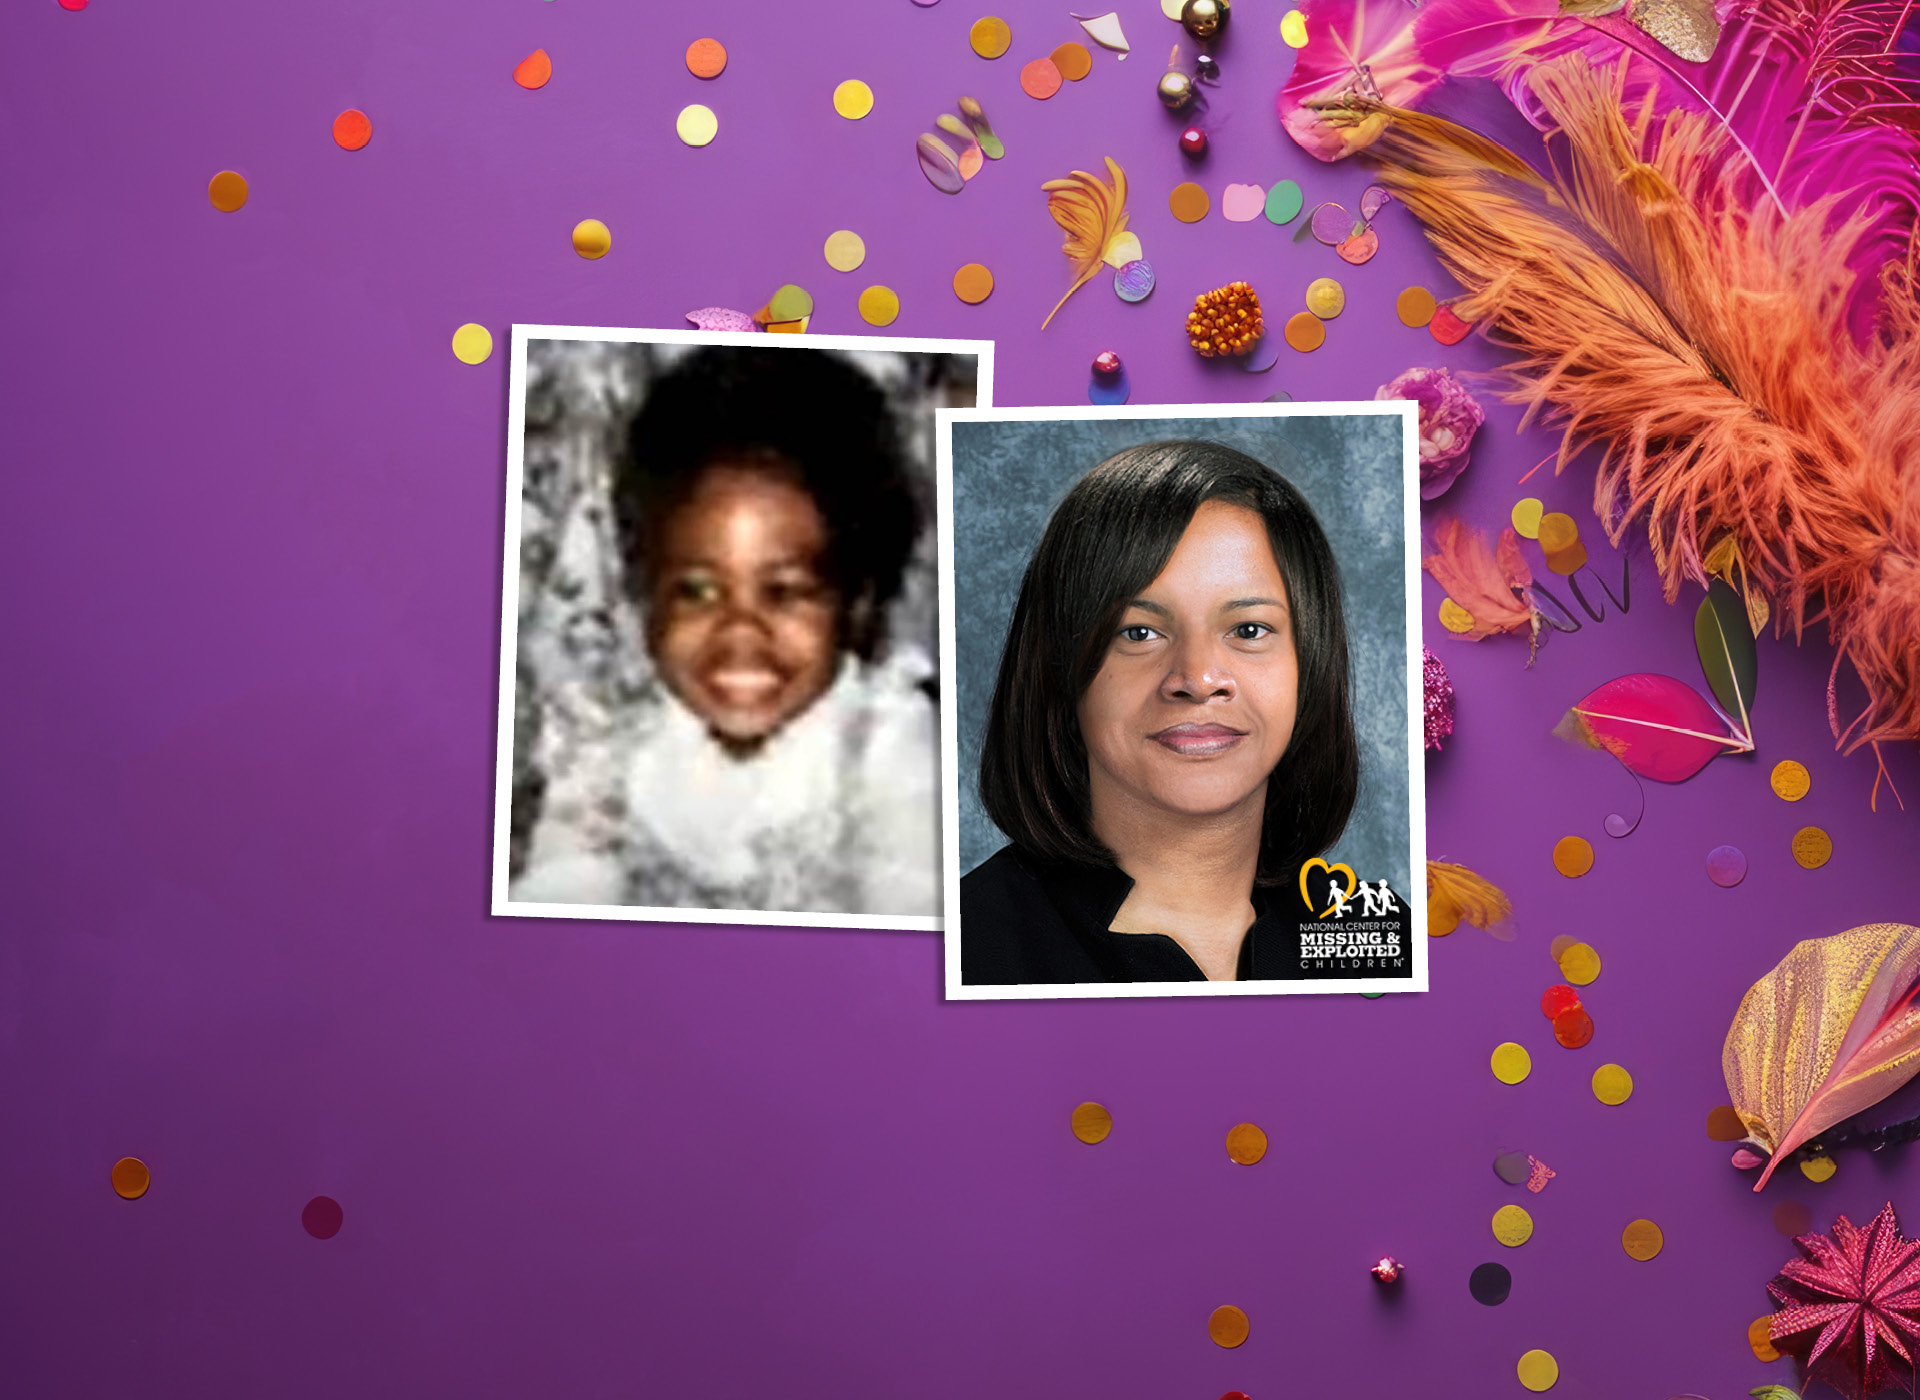 ramona at 3 and her age progression at 43 against purple background with mardi gras feathers and beads